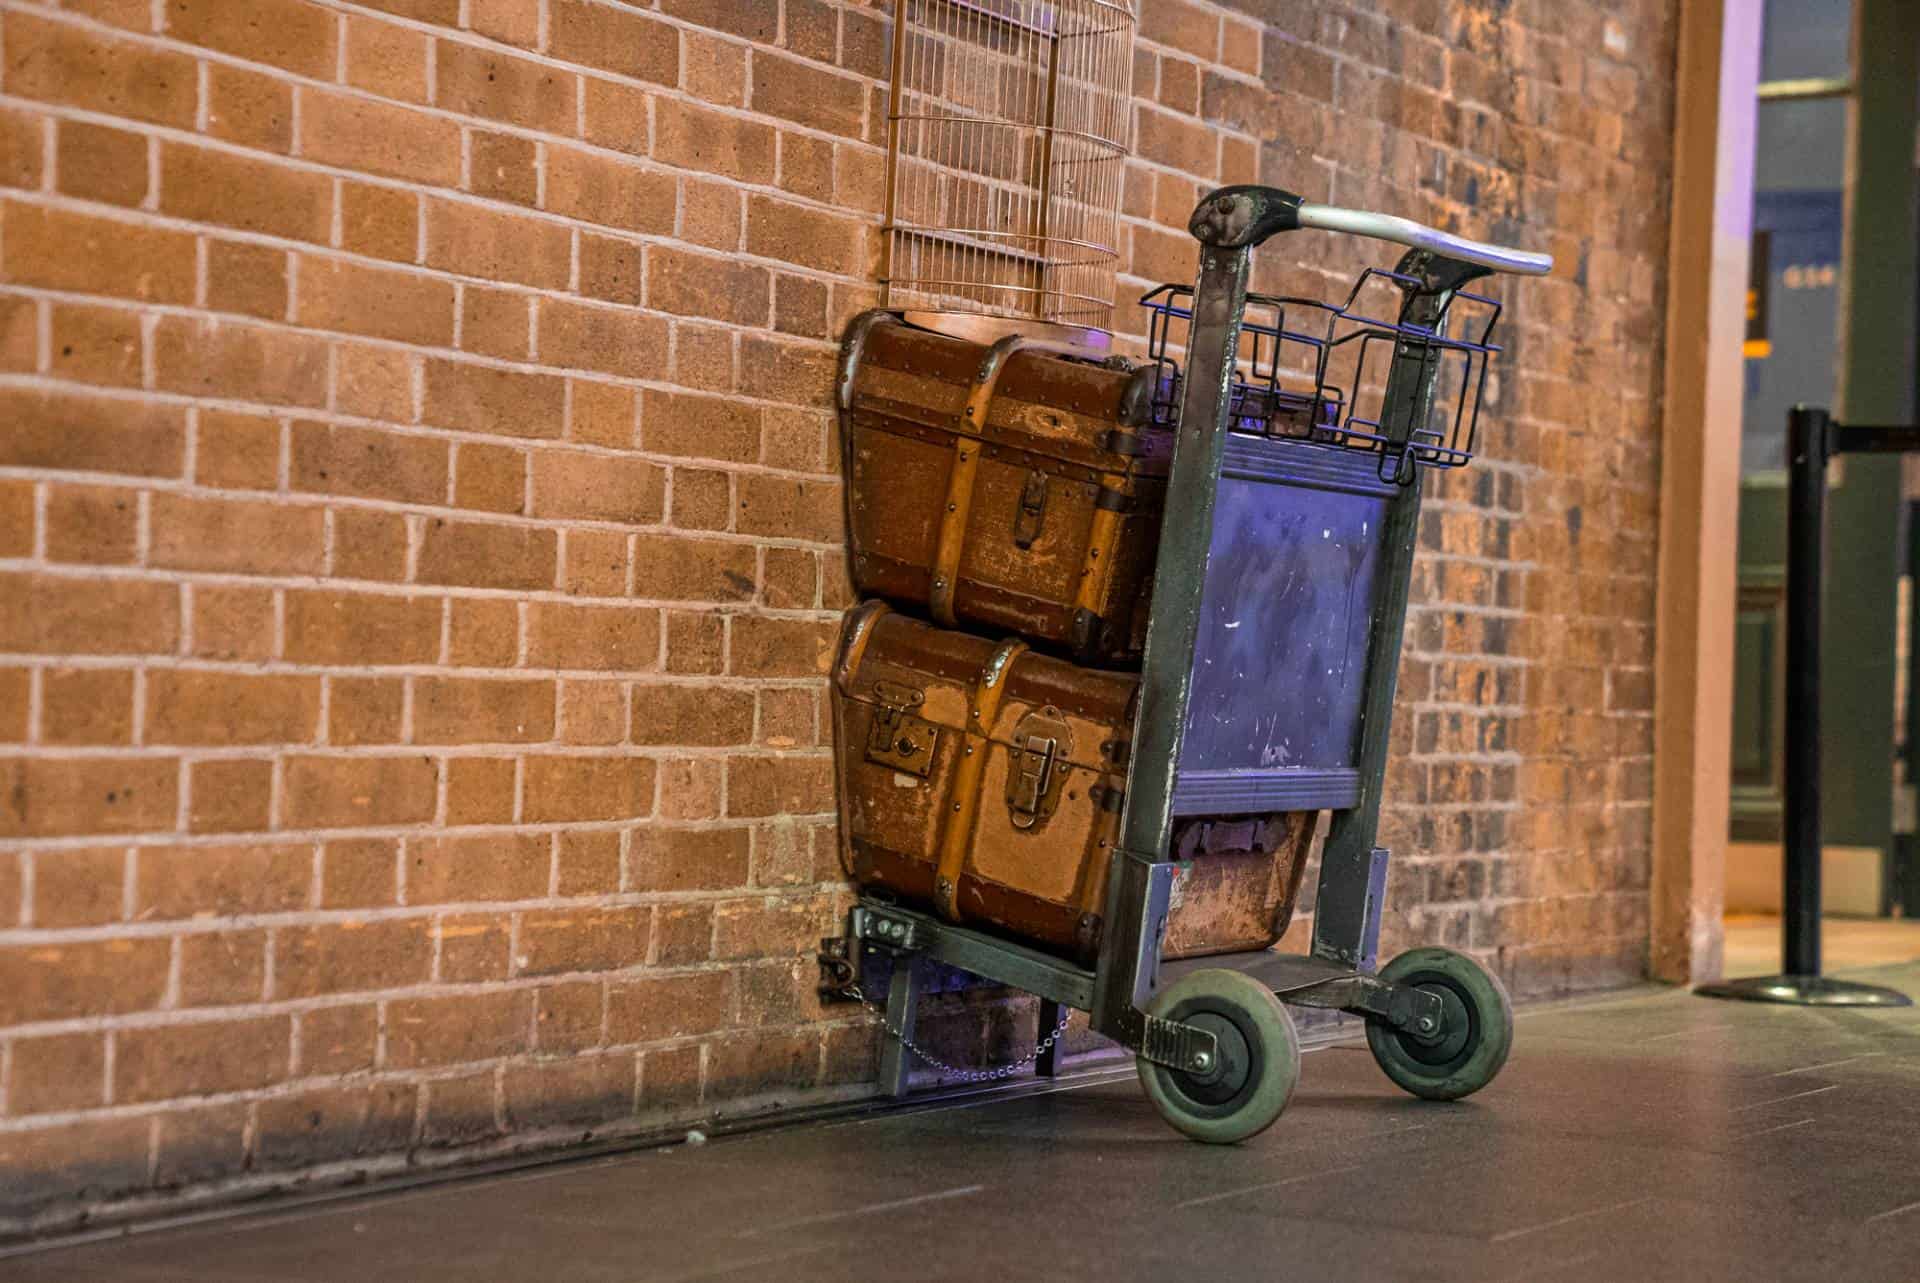 Which train station is Platform 9 3/4 located (from Harry Potter)?